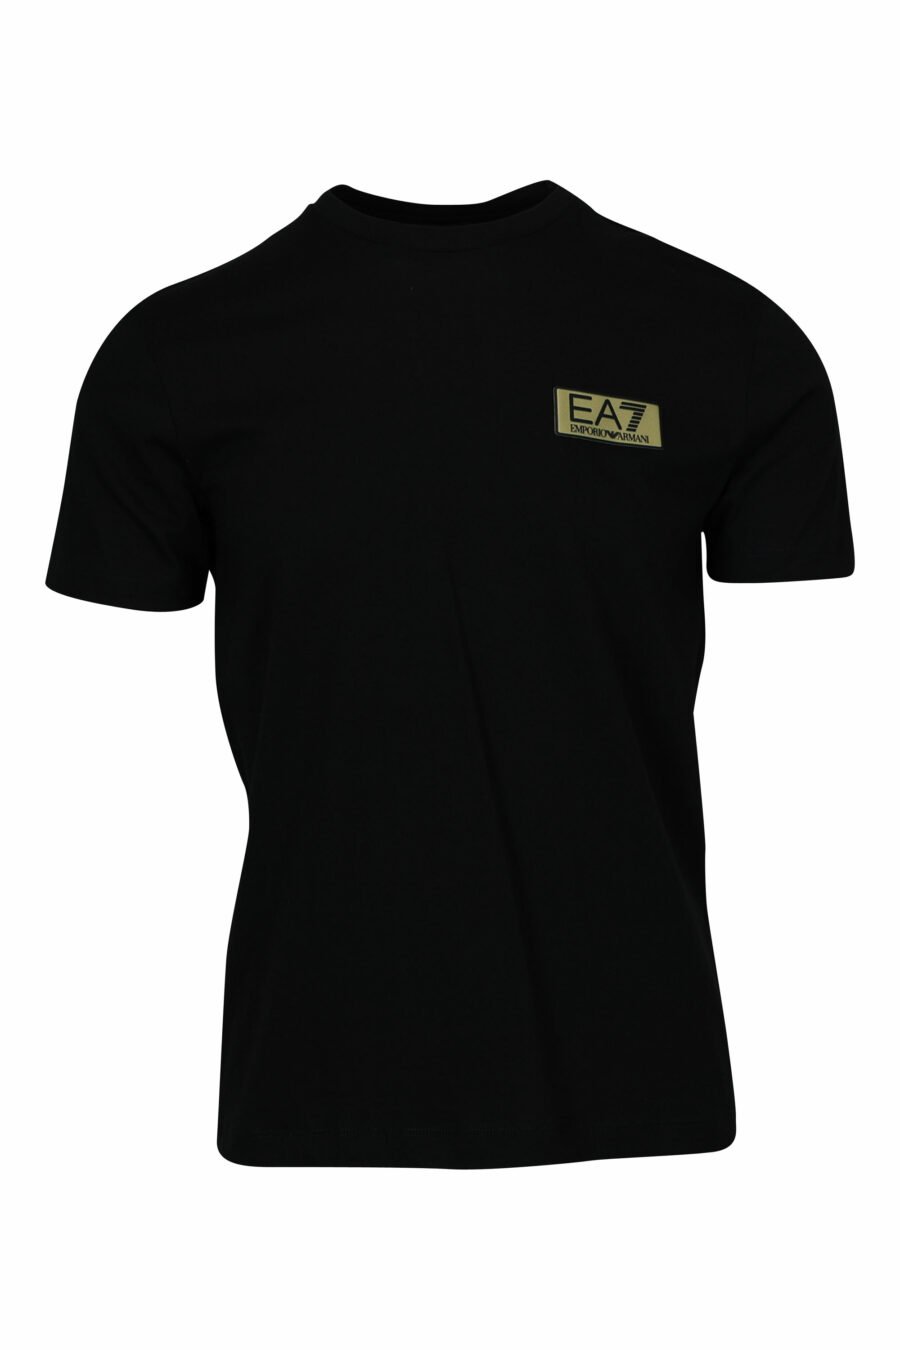 Black T-shirt with black "lux identity" minilogue on gold plate - 8058947471980